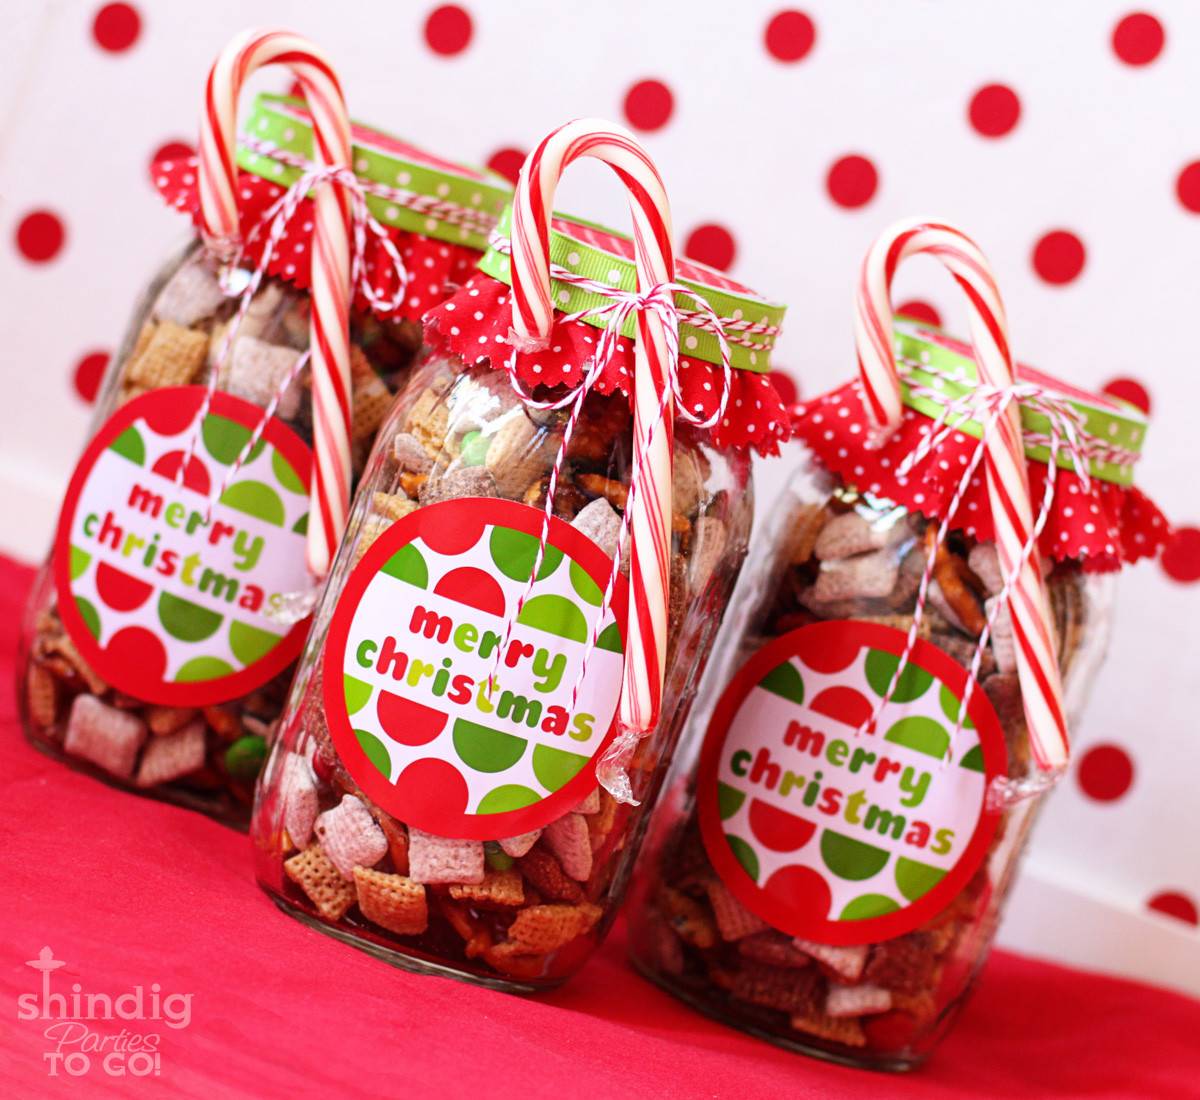 Candy Christmas Gifts
 How To Make Handmade Chex Mix Holiday Gifts & Bonus Free